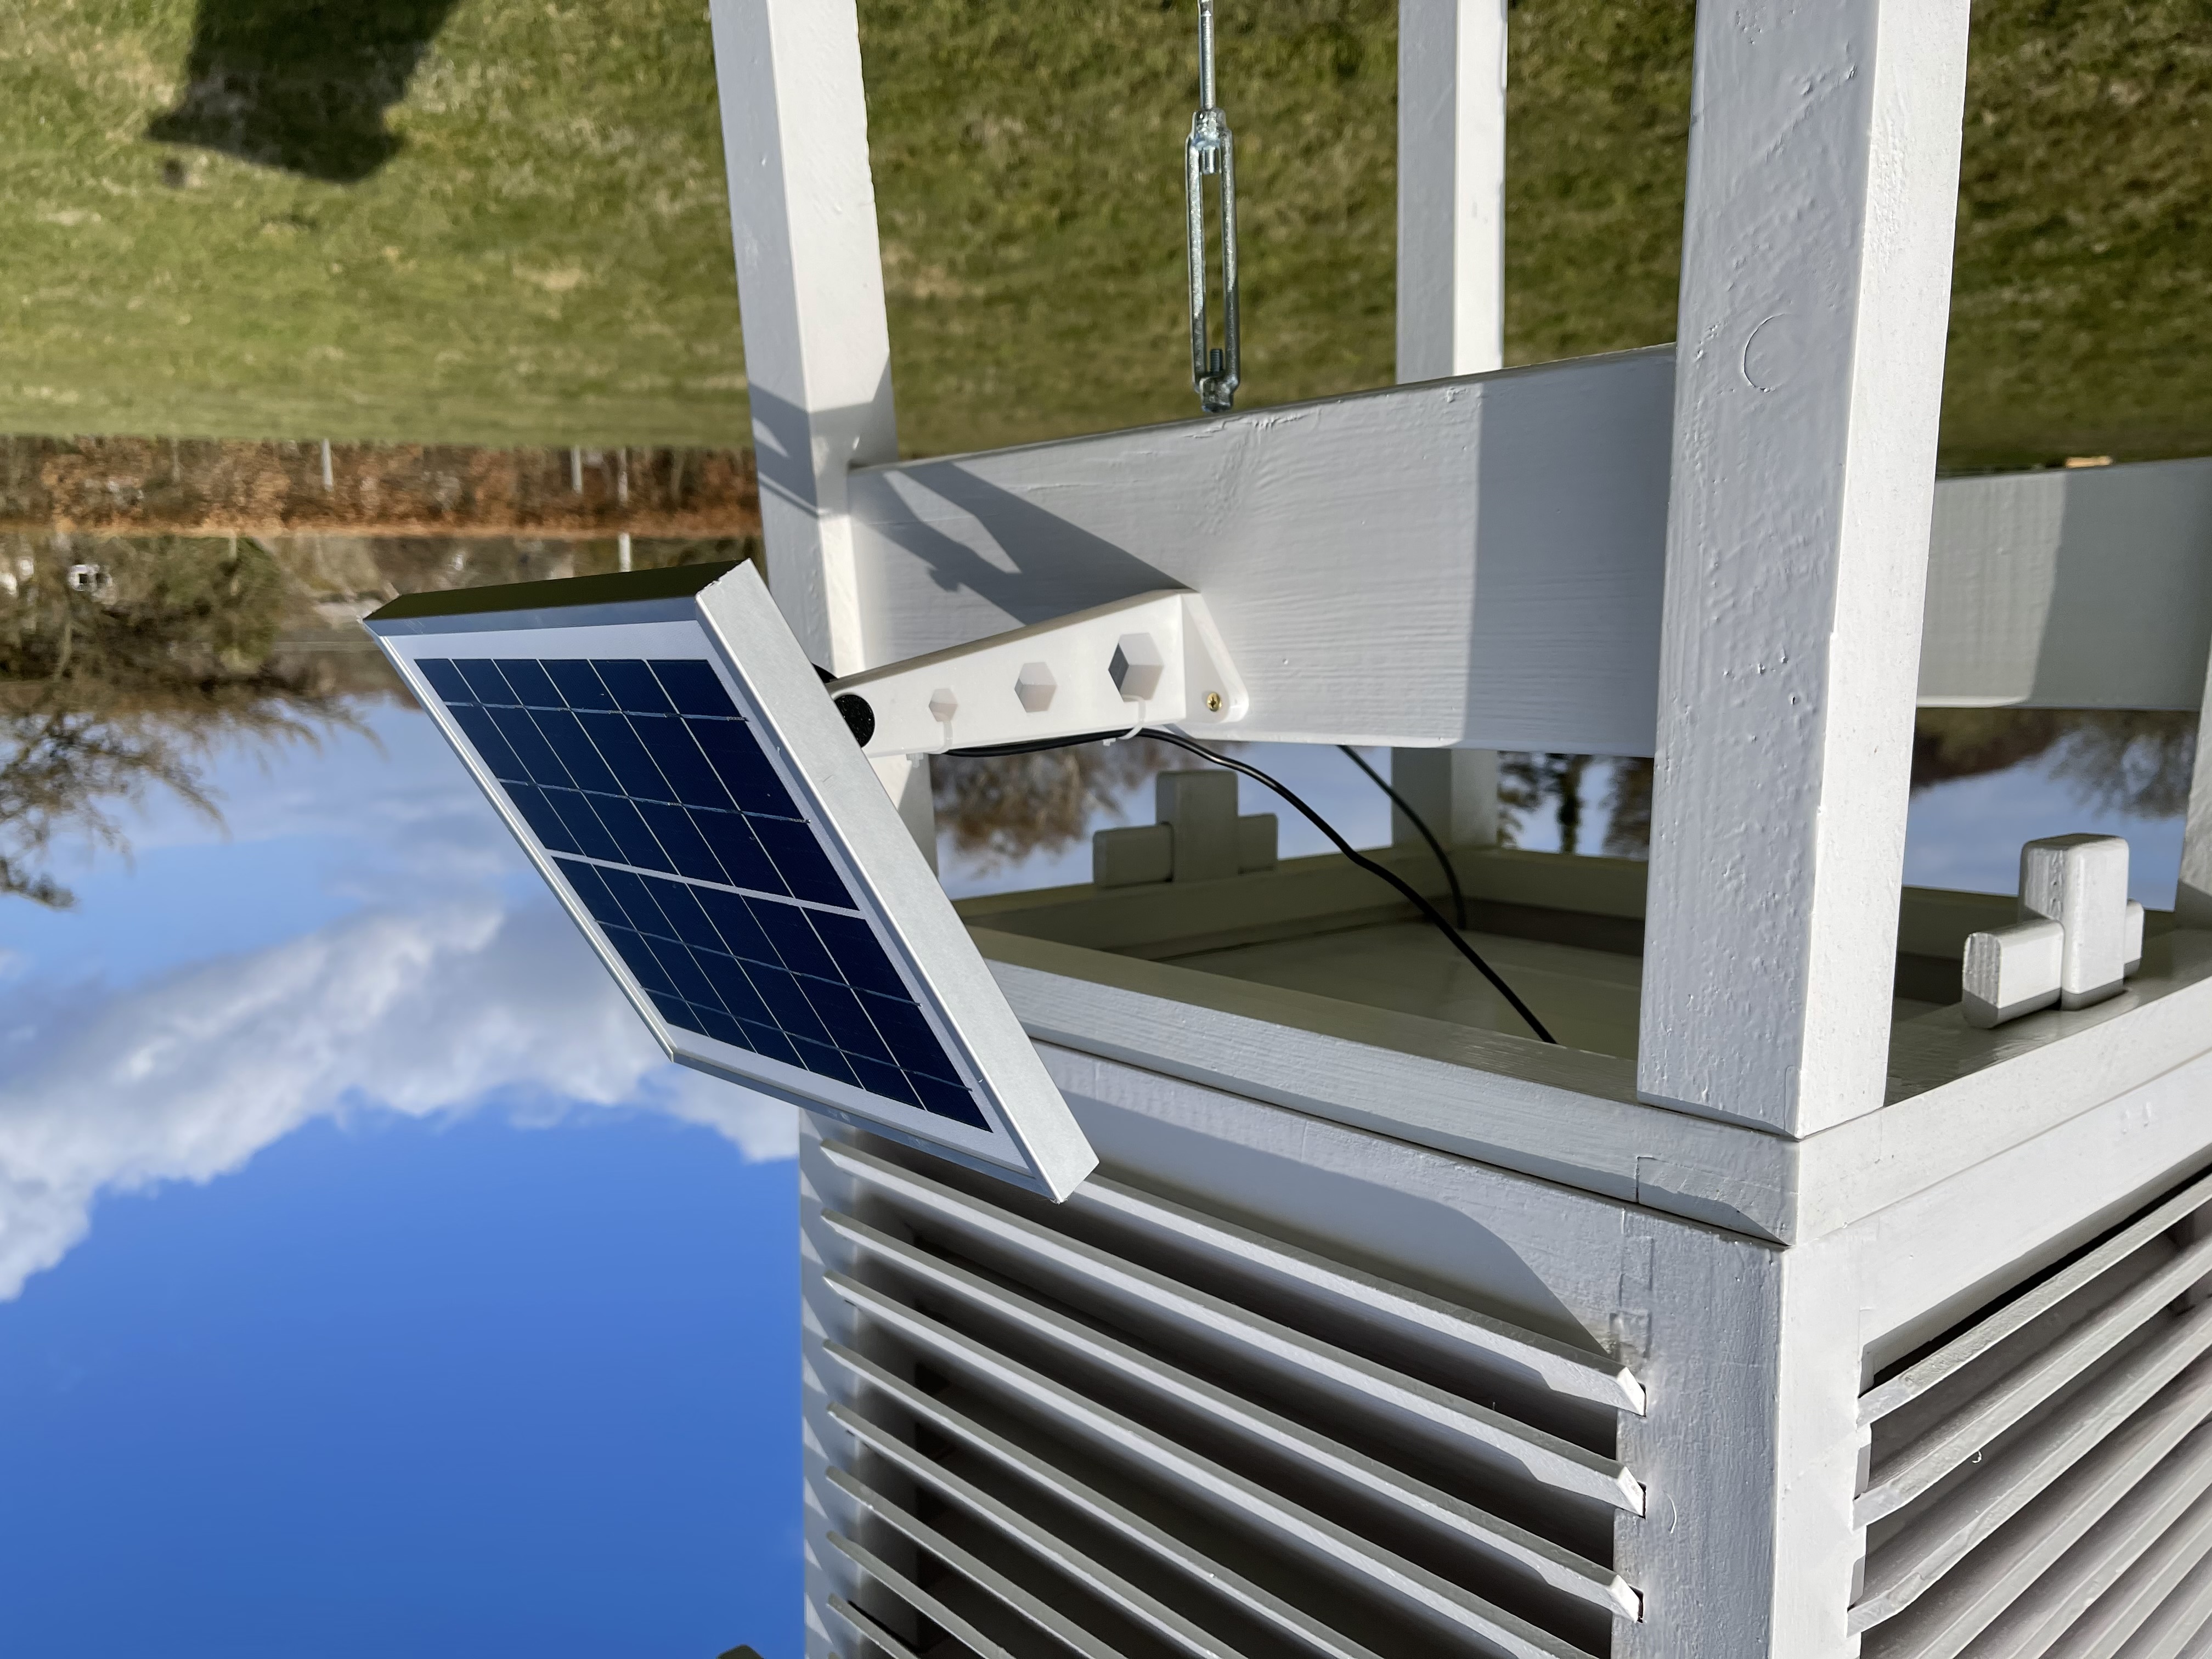 Weather Station One Part 9 - the Solar Panel Mount.